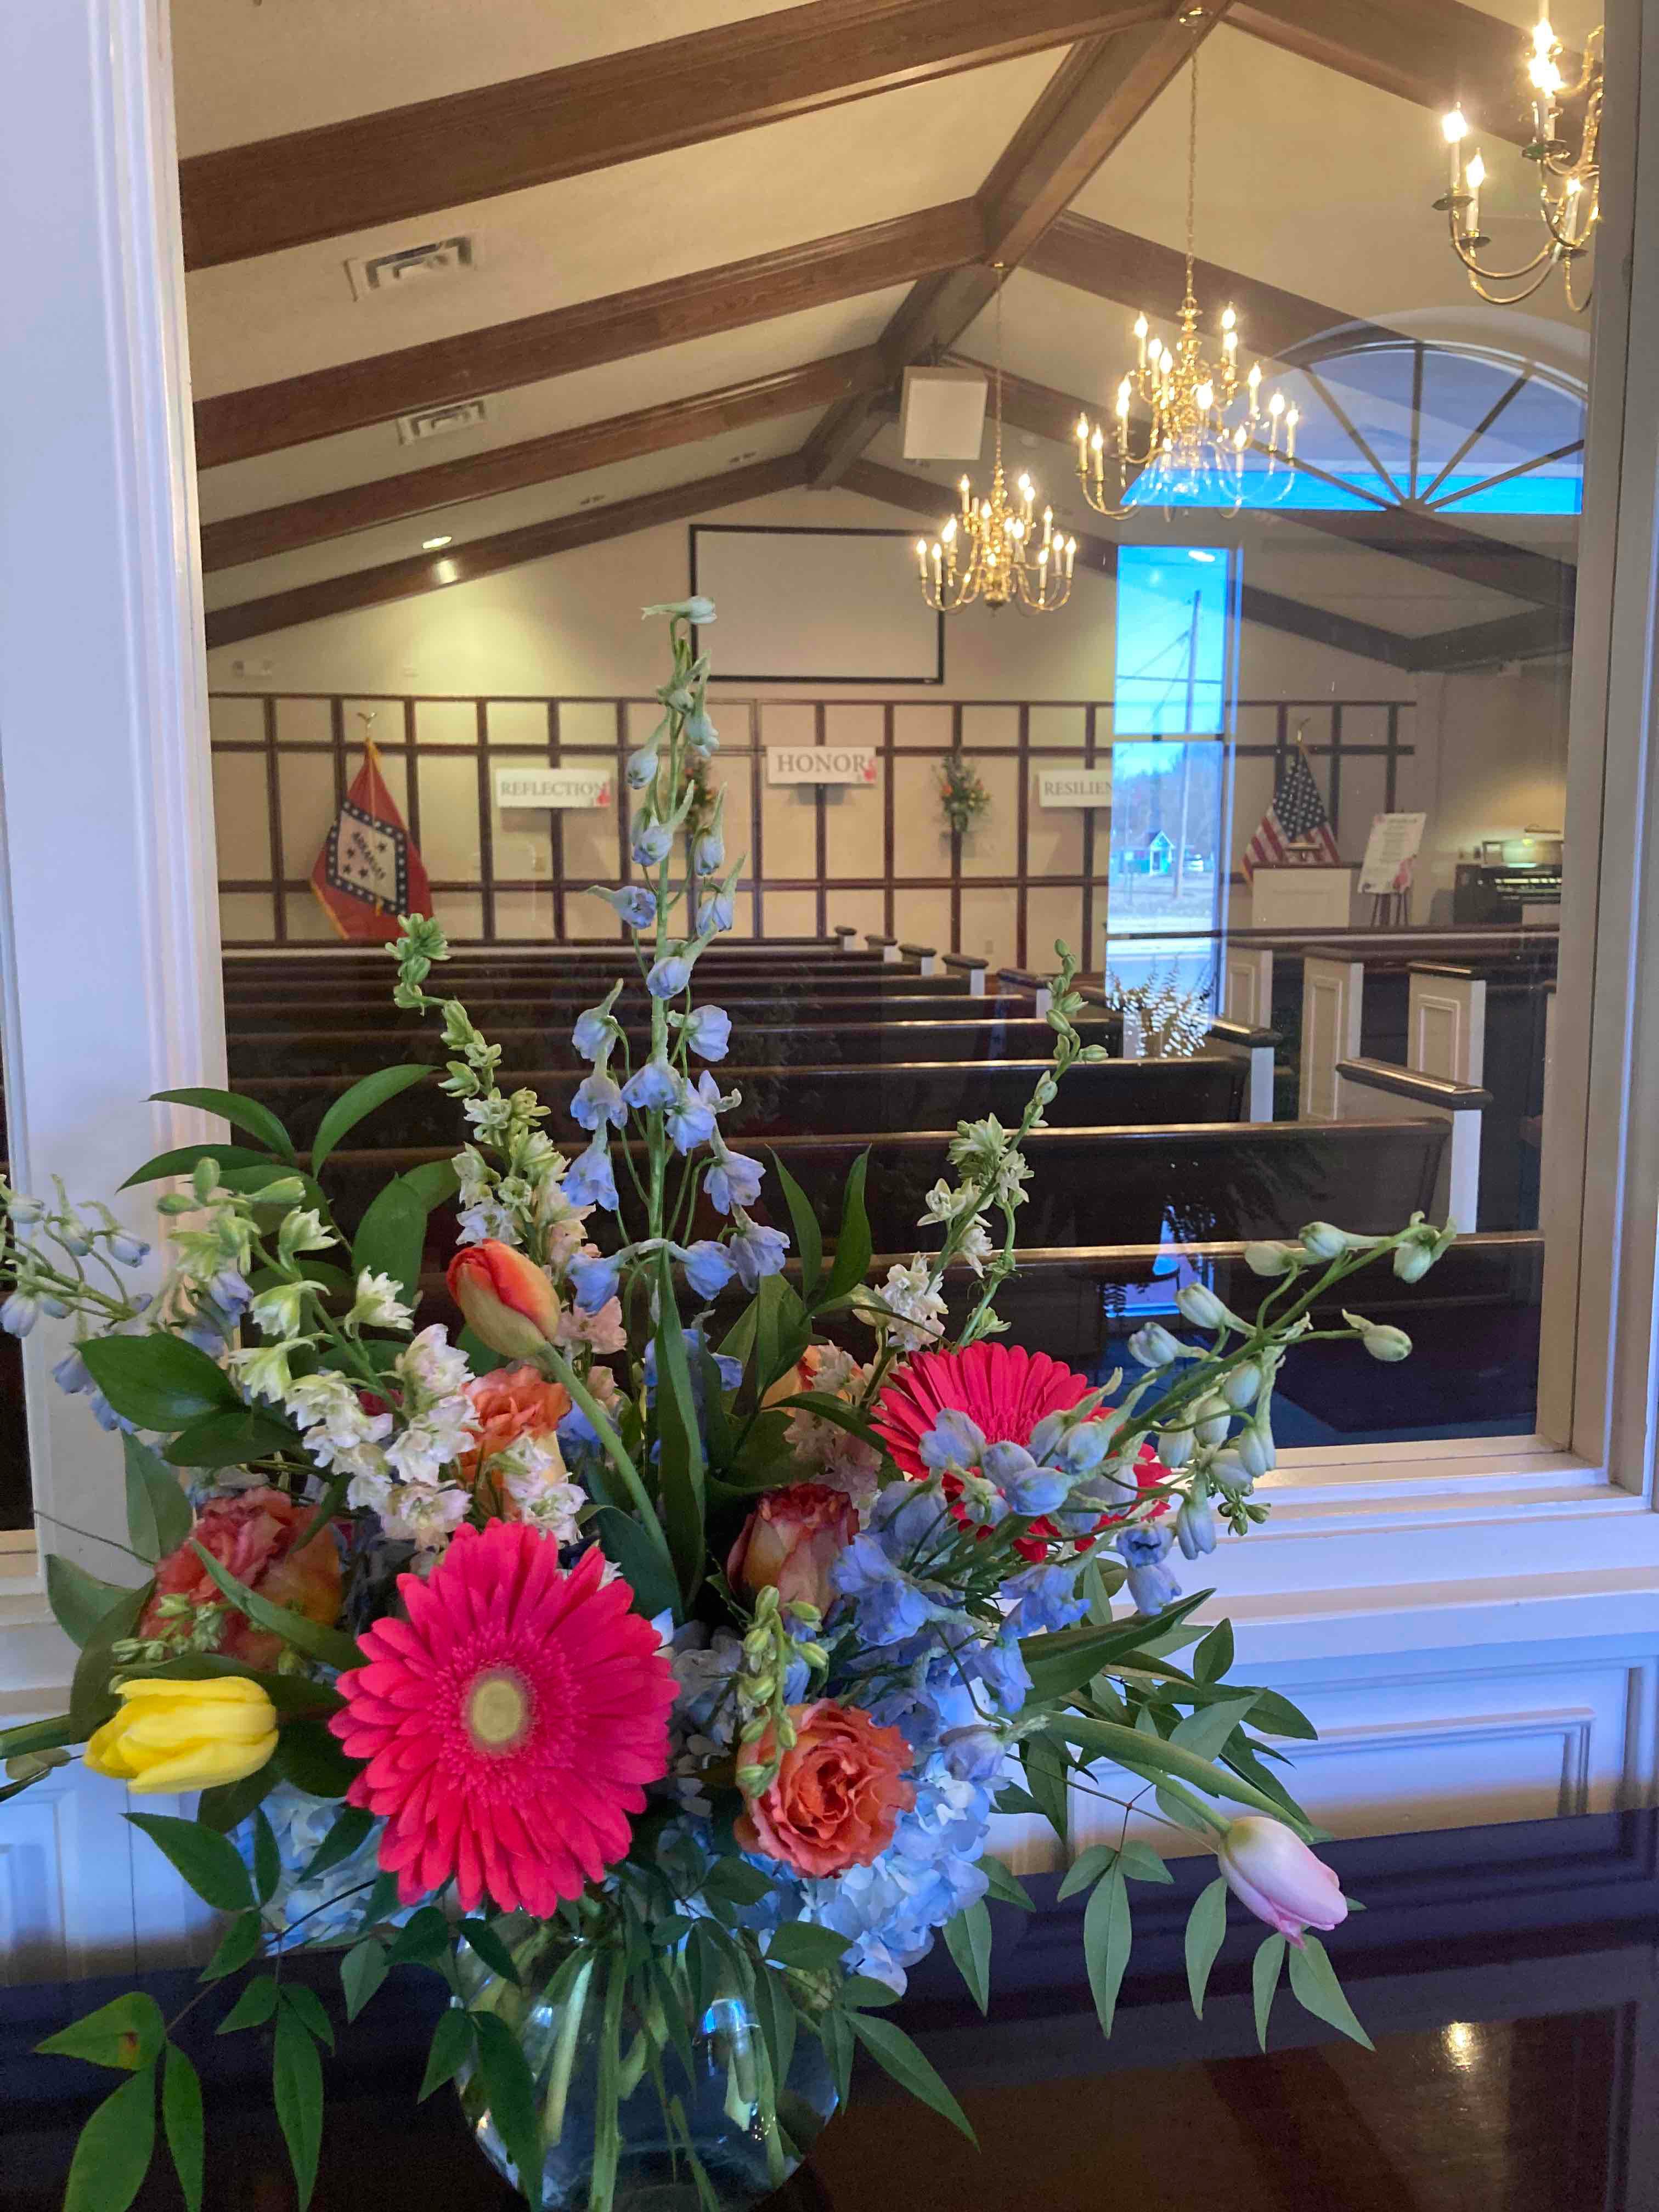 Chapel Photo
Reflection - Honor - Resilience
Arkadelphia 25 Years Later
Smith Family Funeral Homes Arkadelphia, Ruggles-Wilcox Chapel
517 Clay St #6023 
Arkadelphia, AR 71923